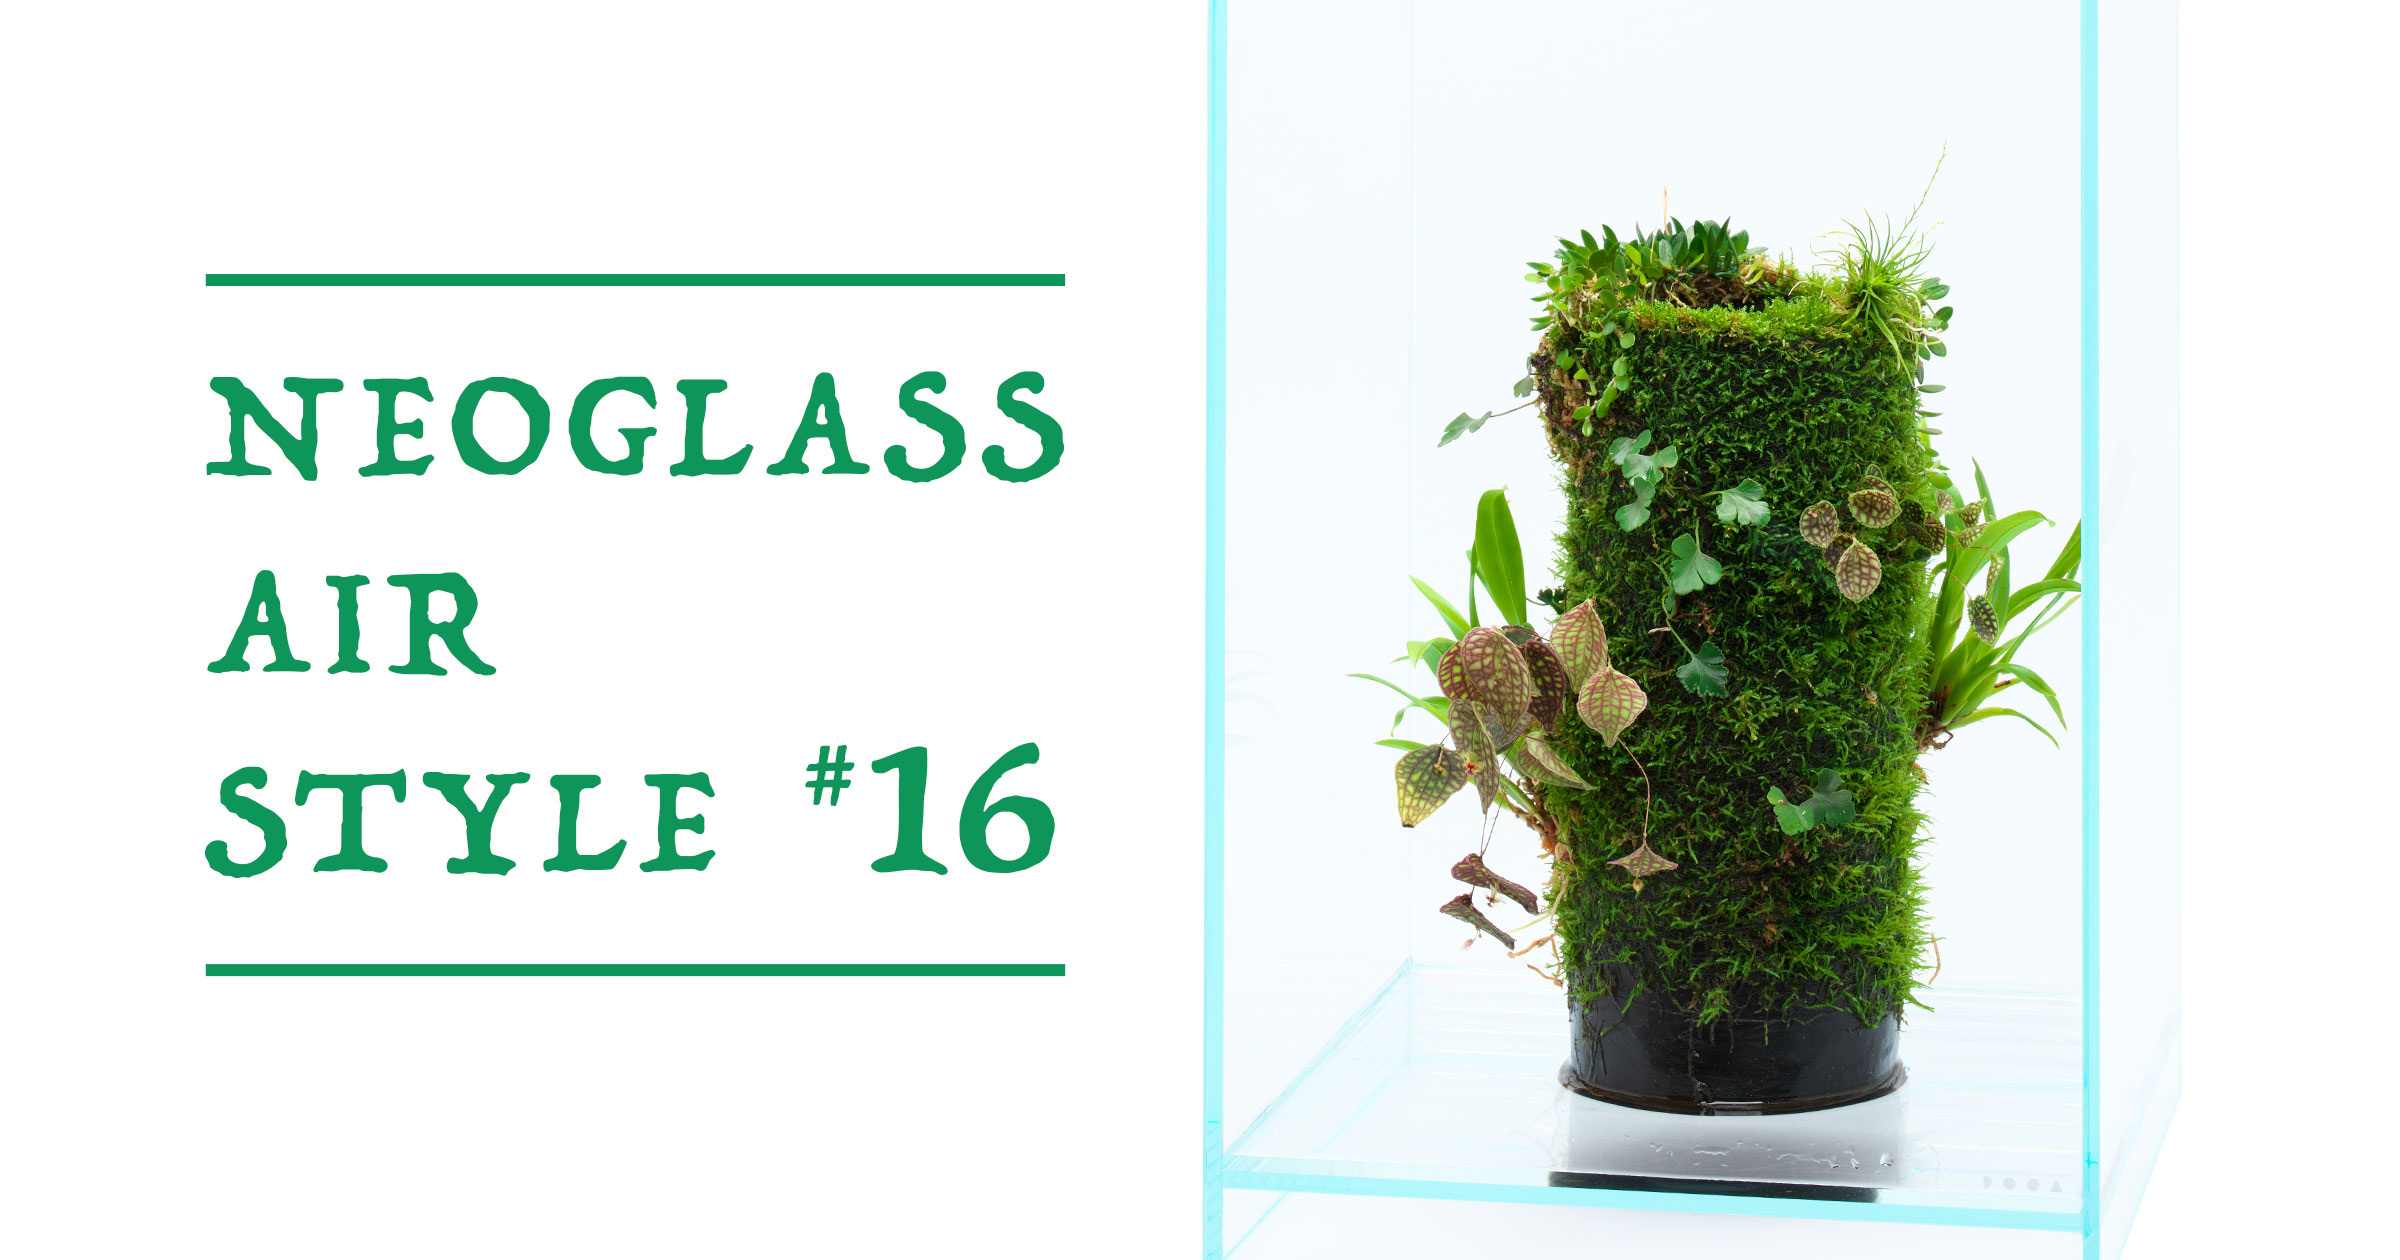 NEO GLASS AIR STYLE ‘Longing For the Natural Habitat’